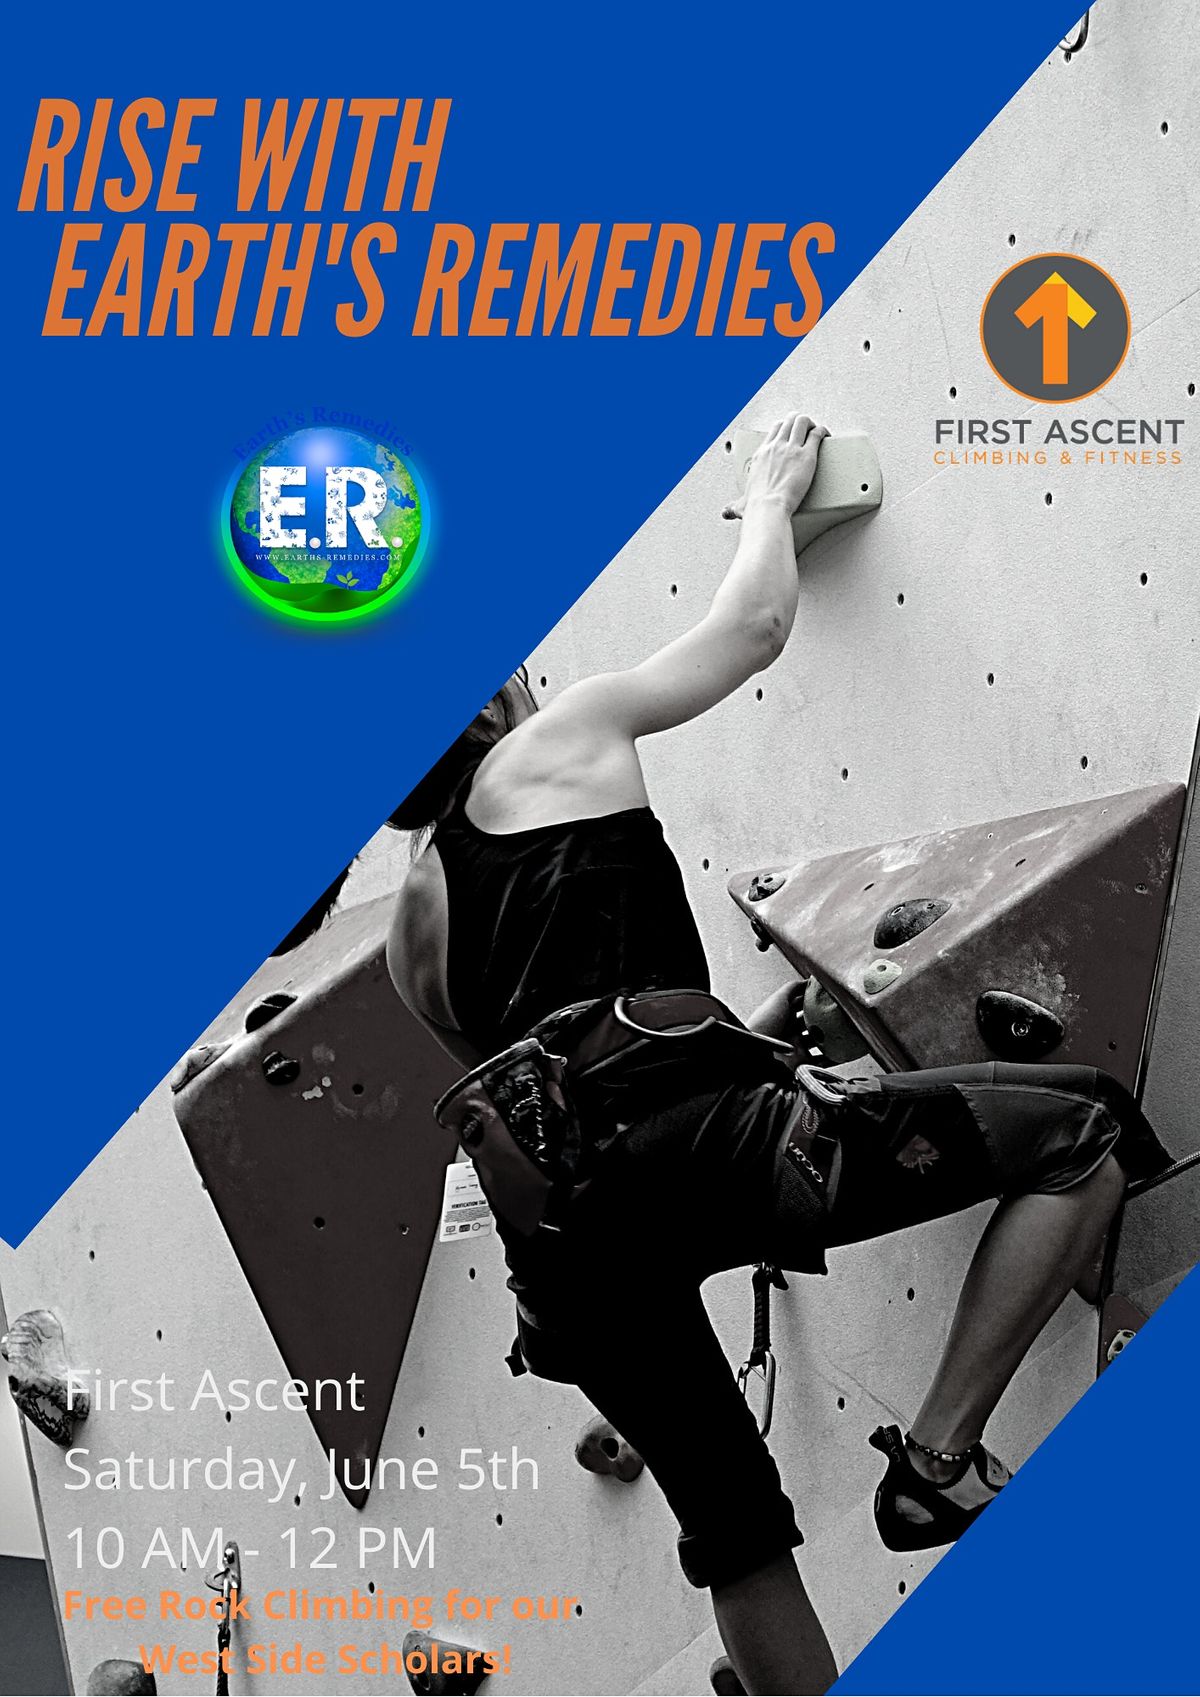 Elevate W\/ Earth's Remedies - Free Rock Climbing at First Ascent